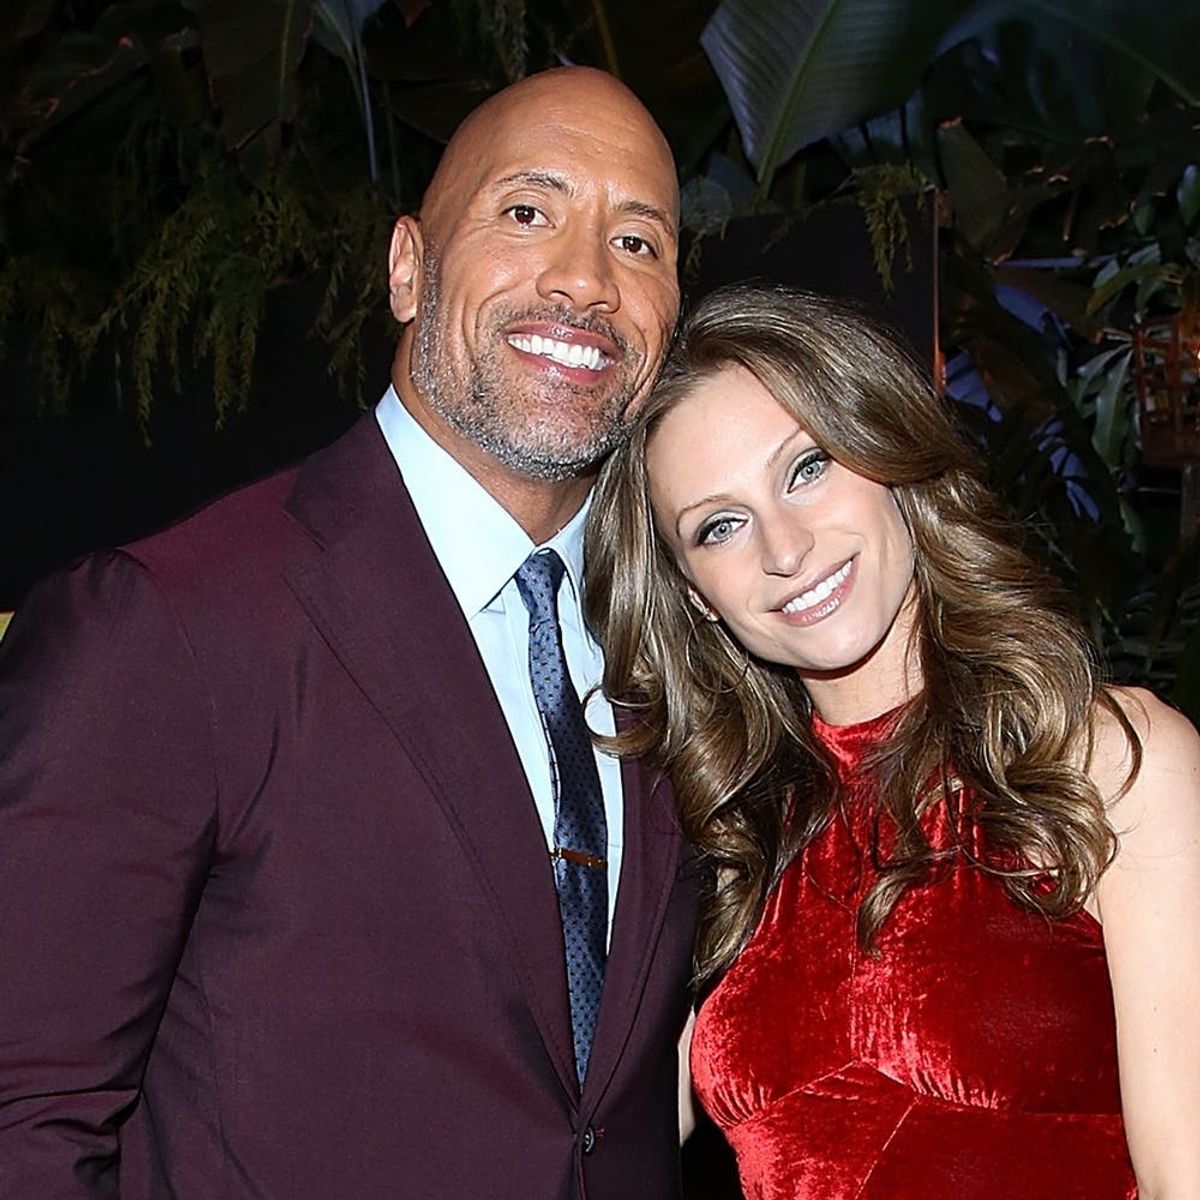 Dwayne Johnson Wins Mother’s Day 2018 With an Aww-Worthy Post to Lauren Hashian